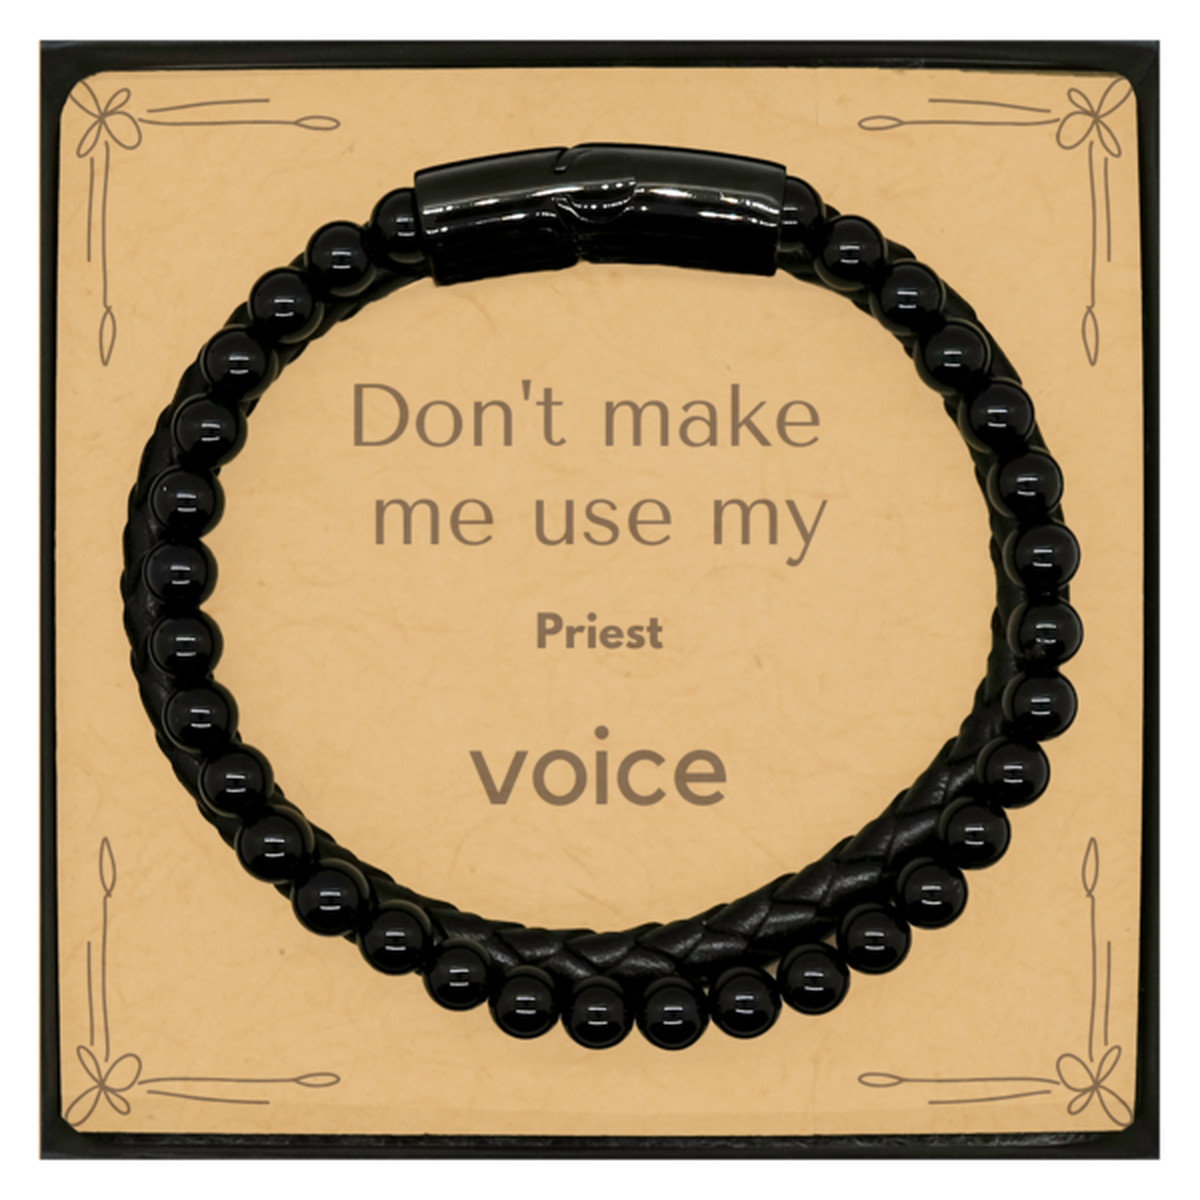 Don't make me use my Priest voice, Sarcasm Priest Card Gifts, Christmas Priest Stone Leather Bracelets Birthday Unique Gifts For Priest Coworkers, Men, Women, Colleague, Friends